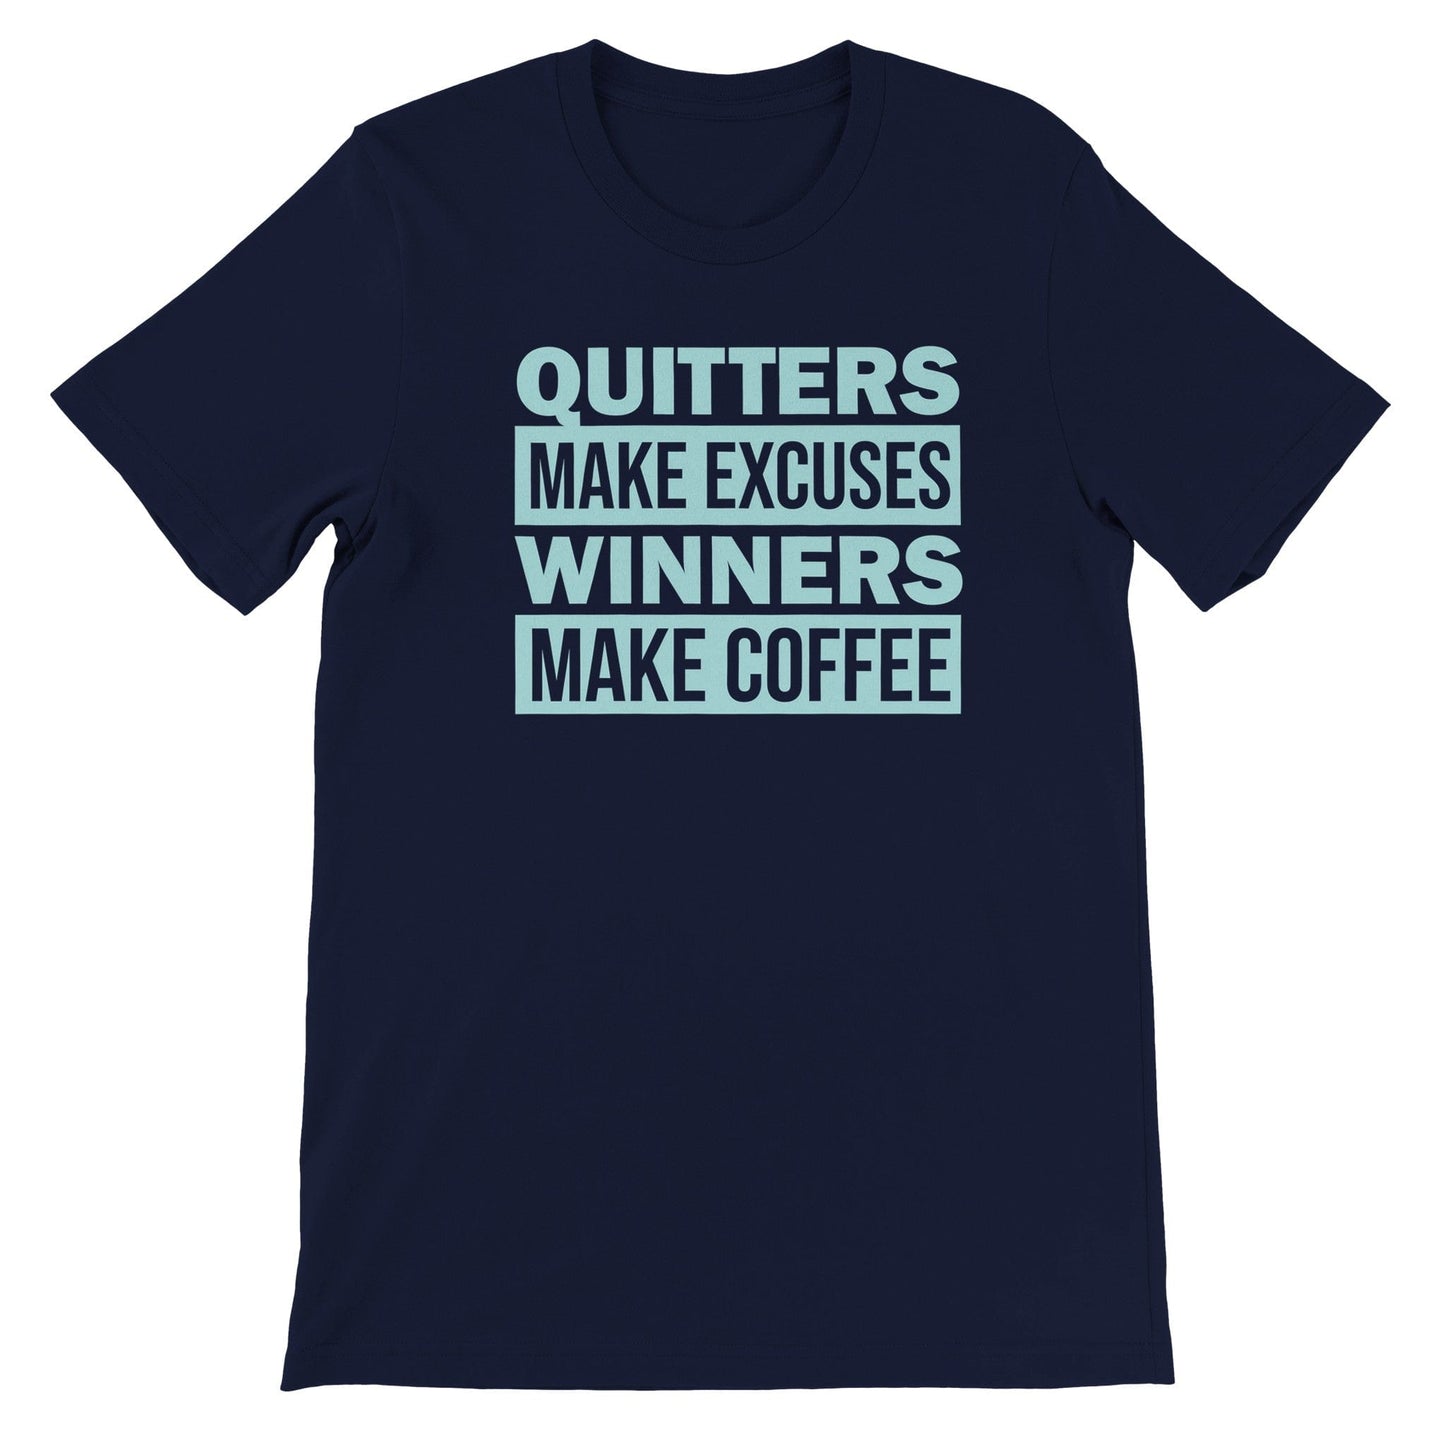 Good Bean Gifts Quitters Make Excuses, Winners make Coffee - Unisex Crewneck T-shirt Navy / S